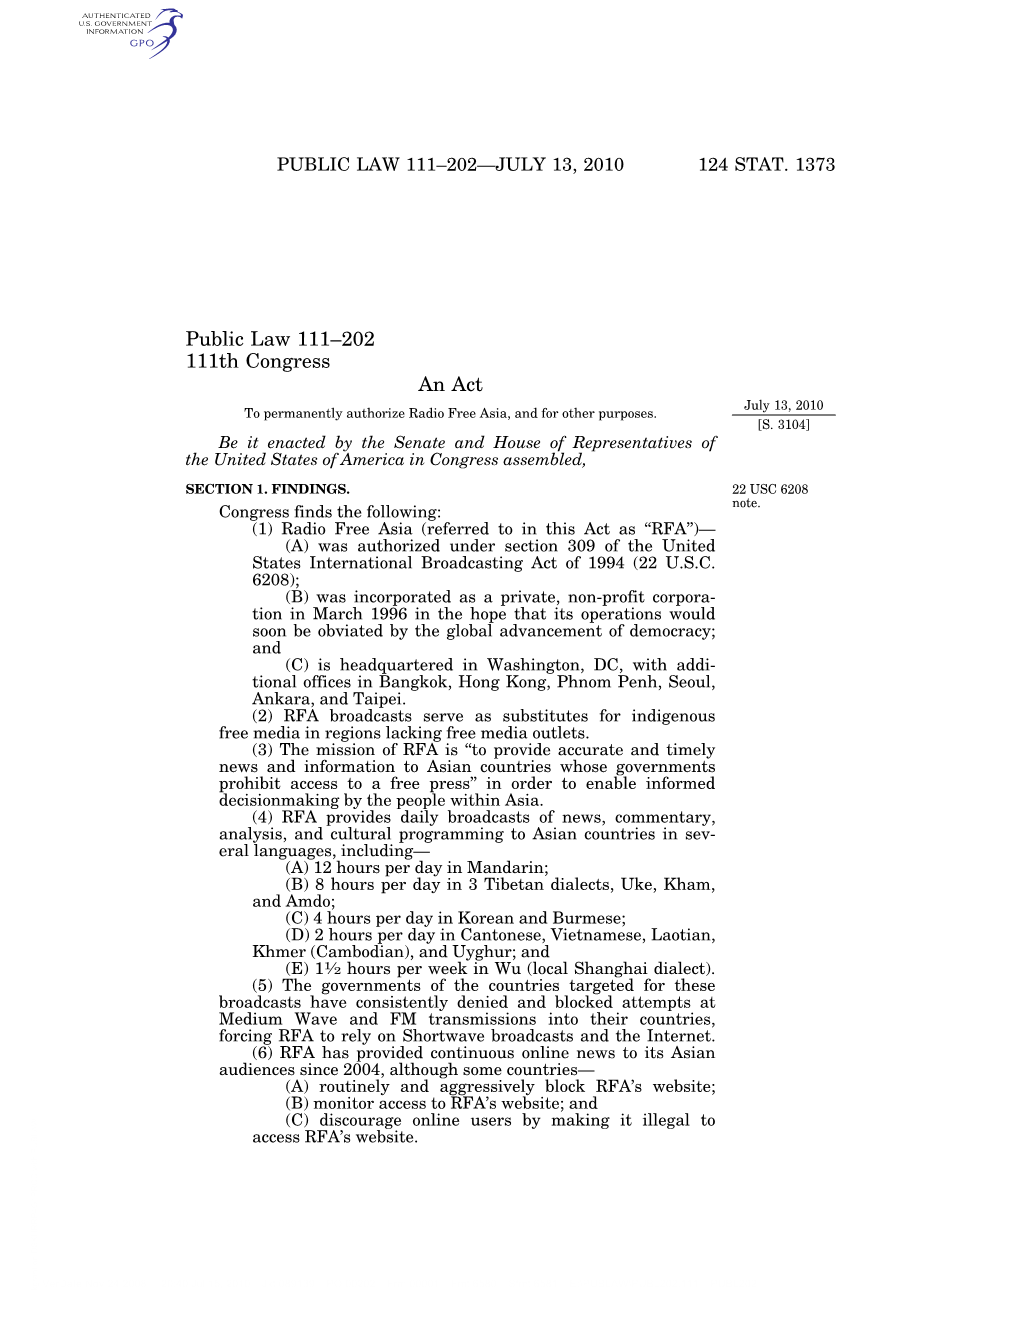 Public Law 111–202 111Th Congress an Act July 13, 2010 to Permanently Authorize Radio Free Asia, and for Other Purposes